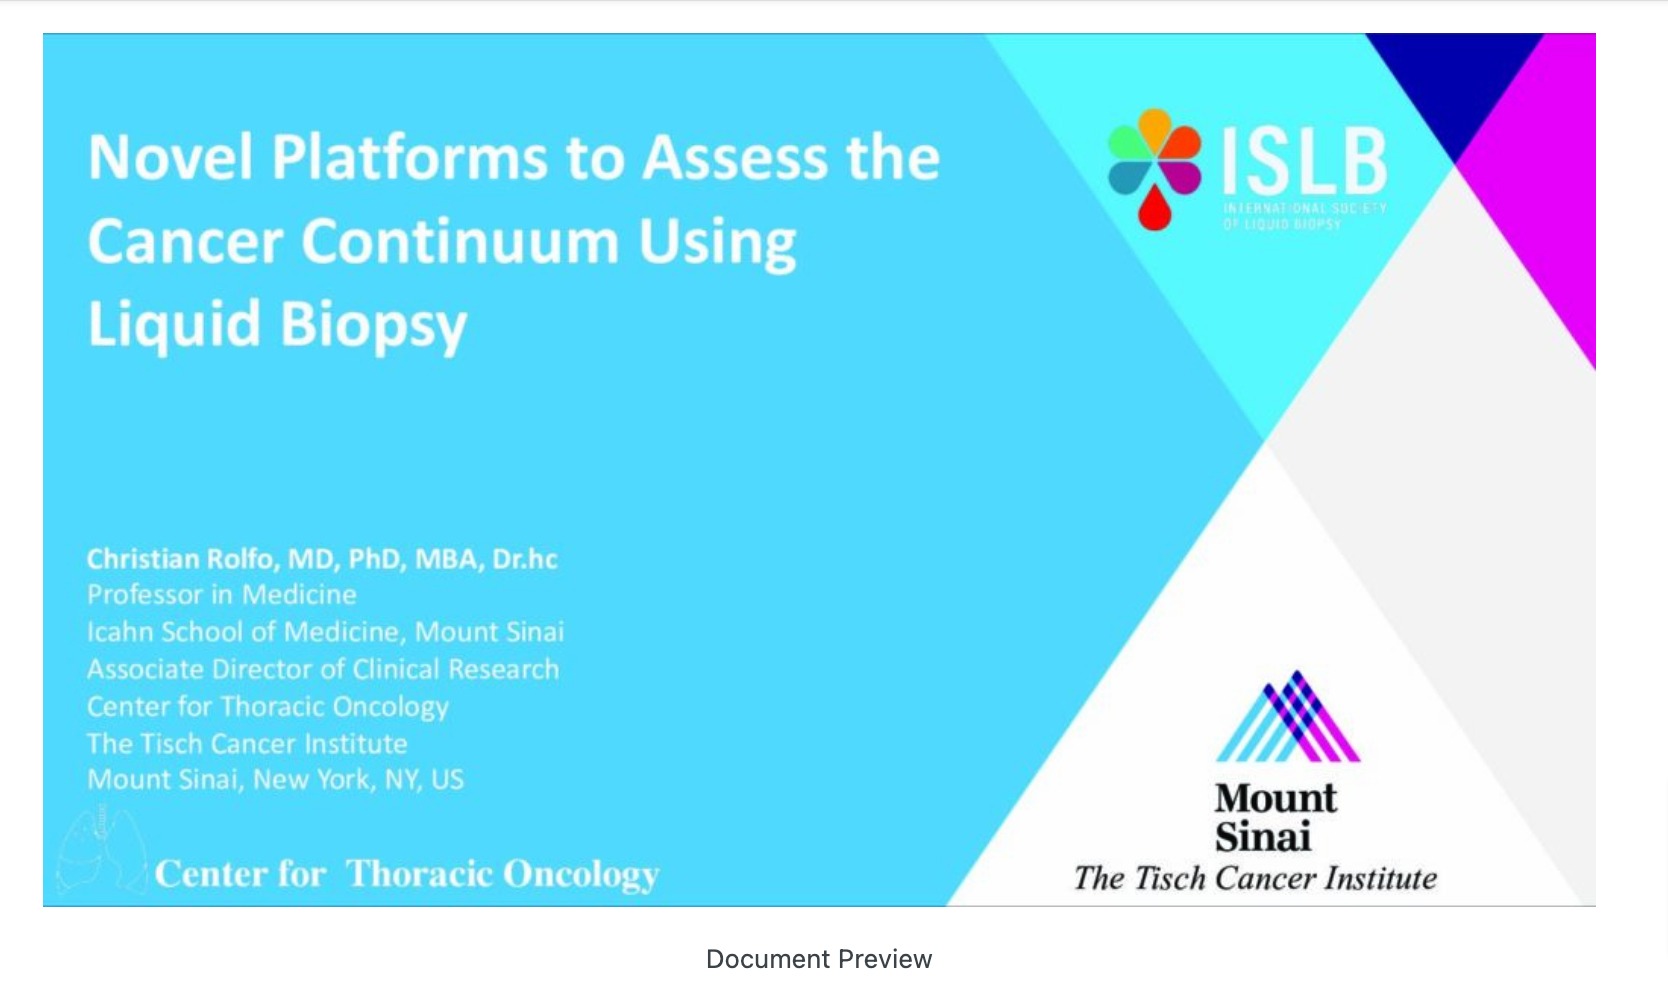 Novel Platforms to Assess the Cancer Continuom Using Liquid Biopsy